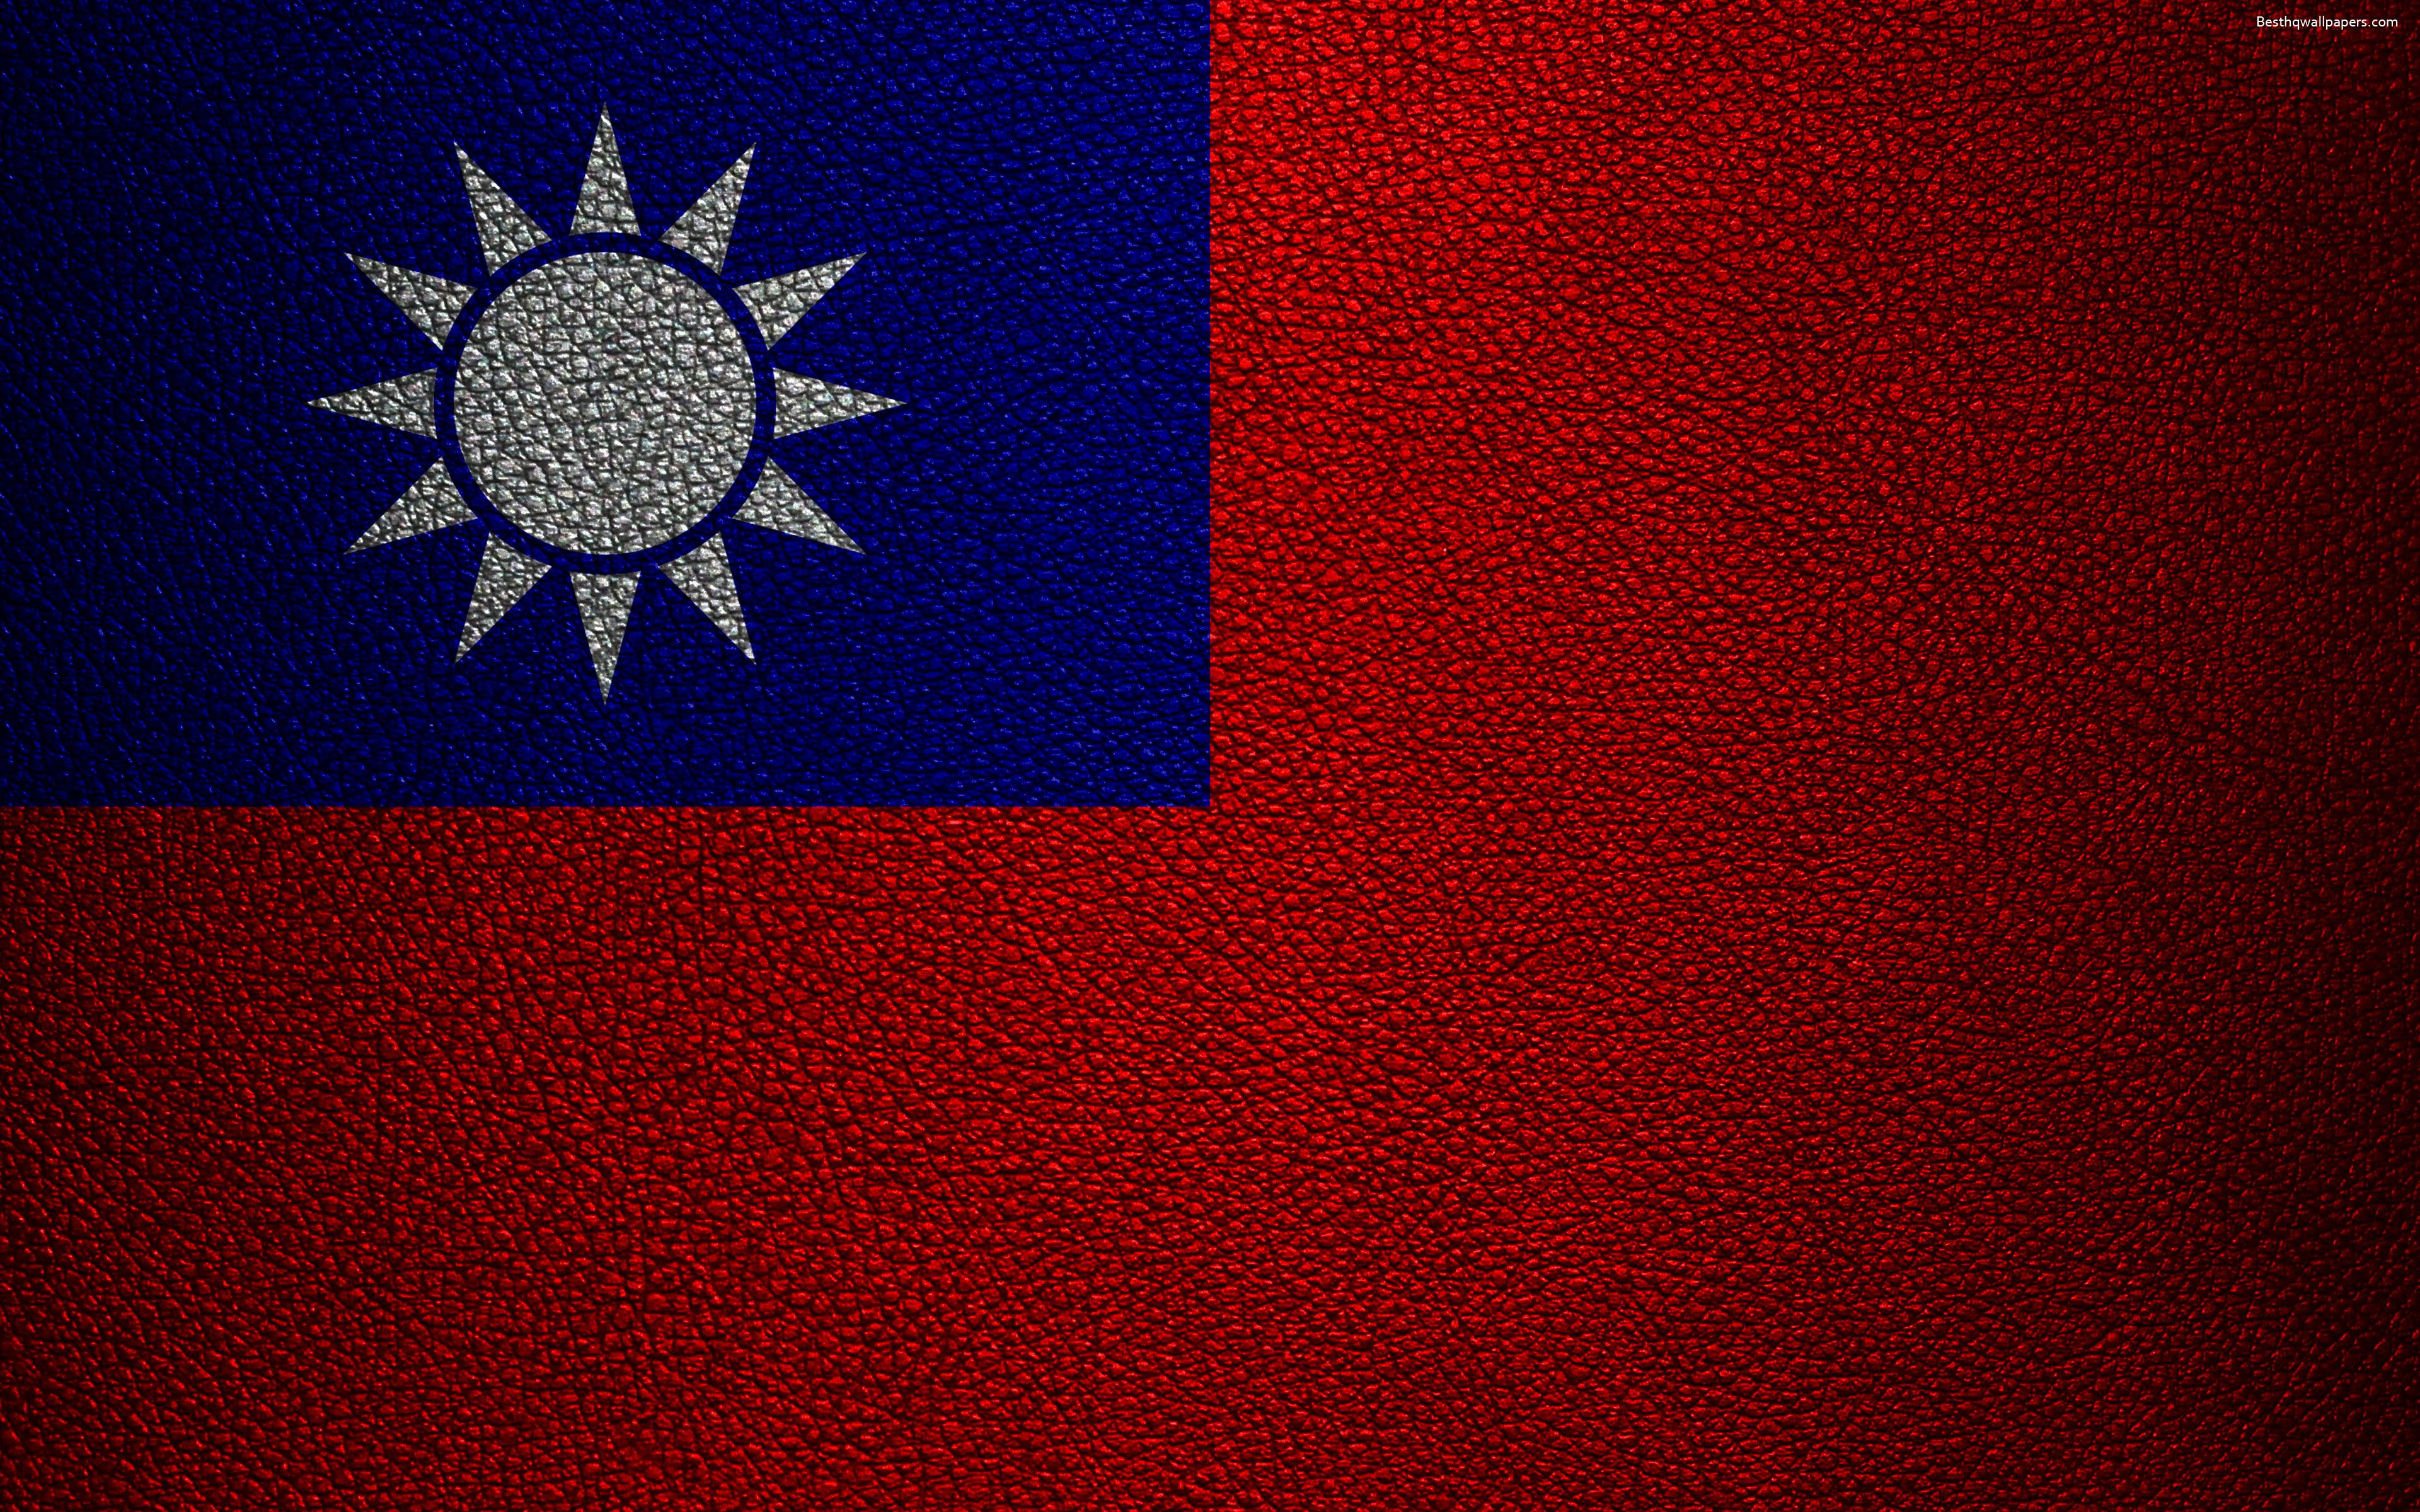 Download wallpaper Taiwan Flag, 4K, leather texture, Taiwan flag